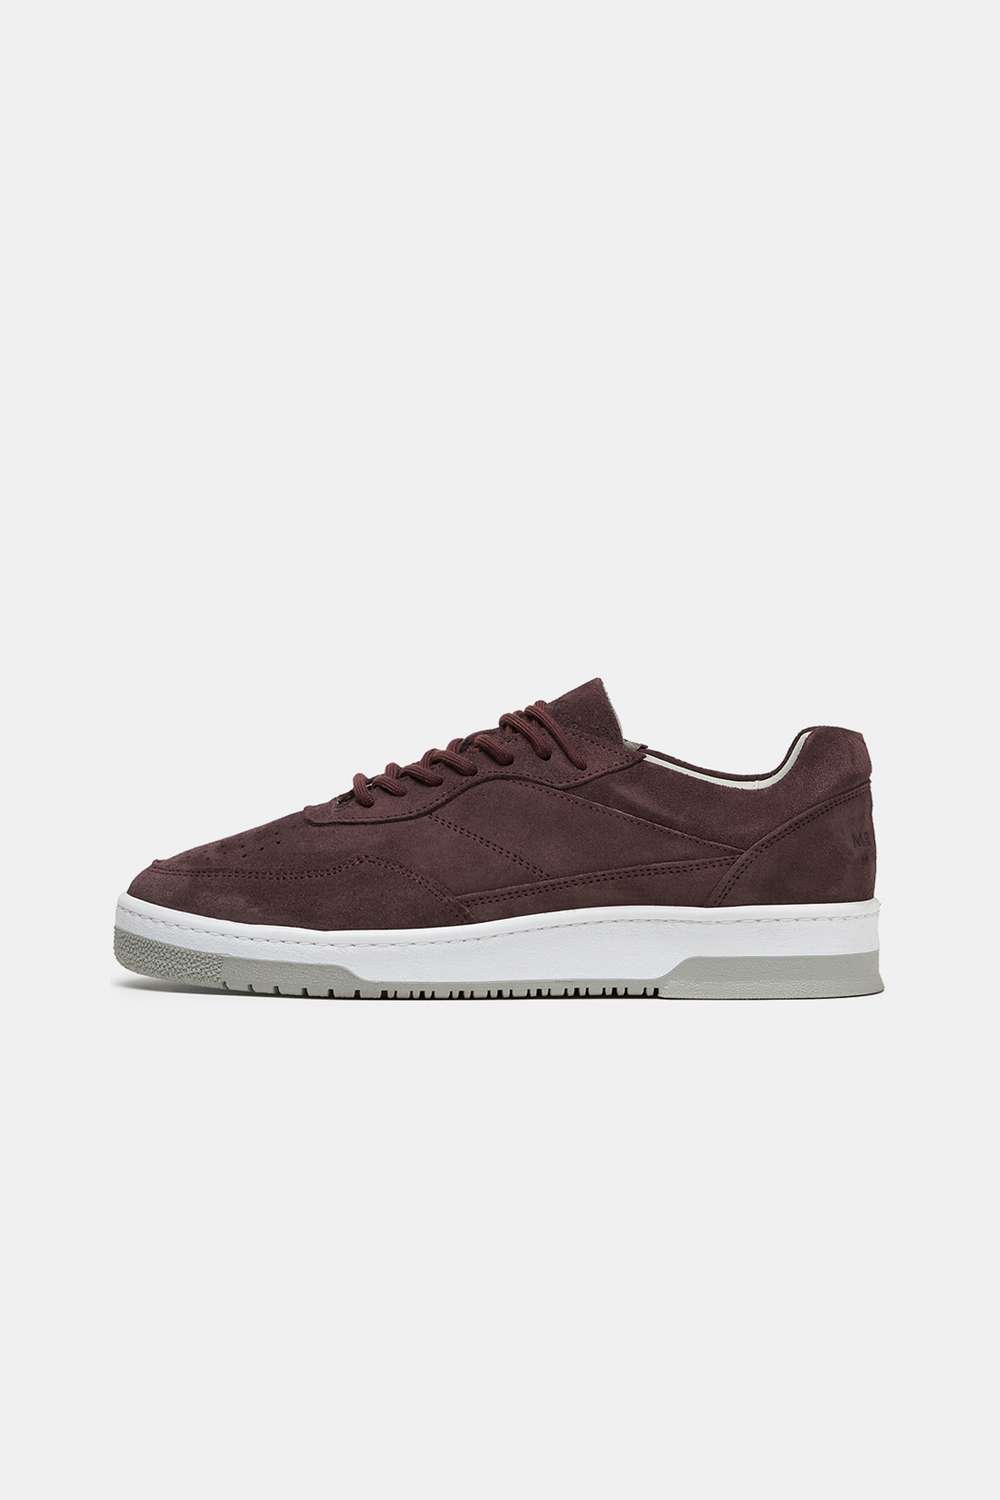 Reserves - The Suede Sneakers